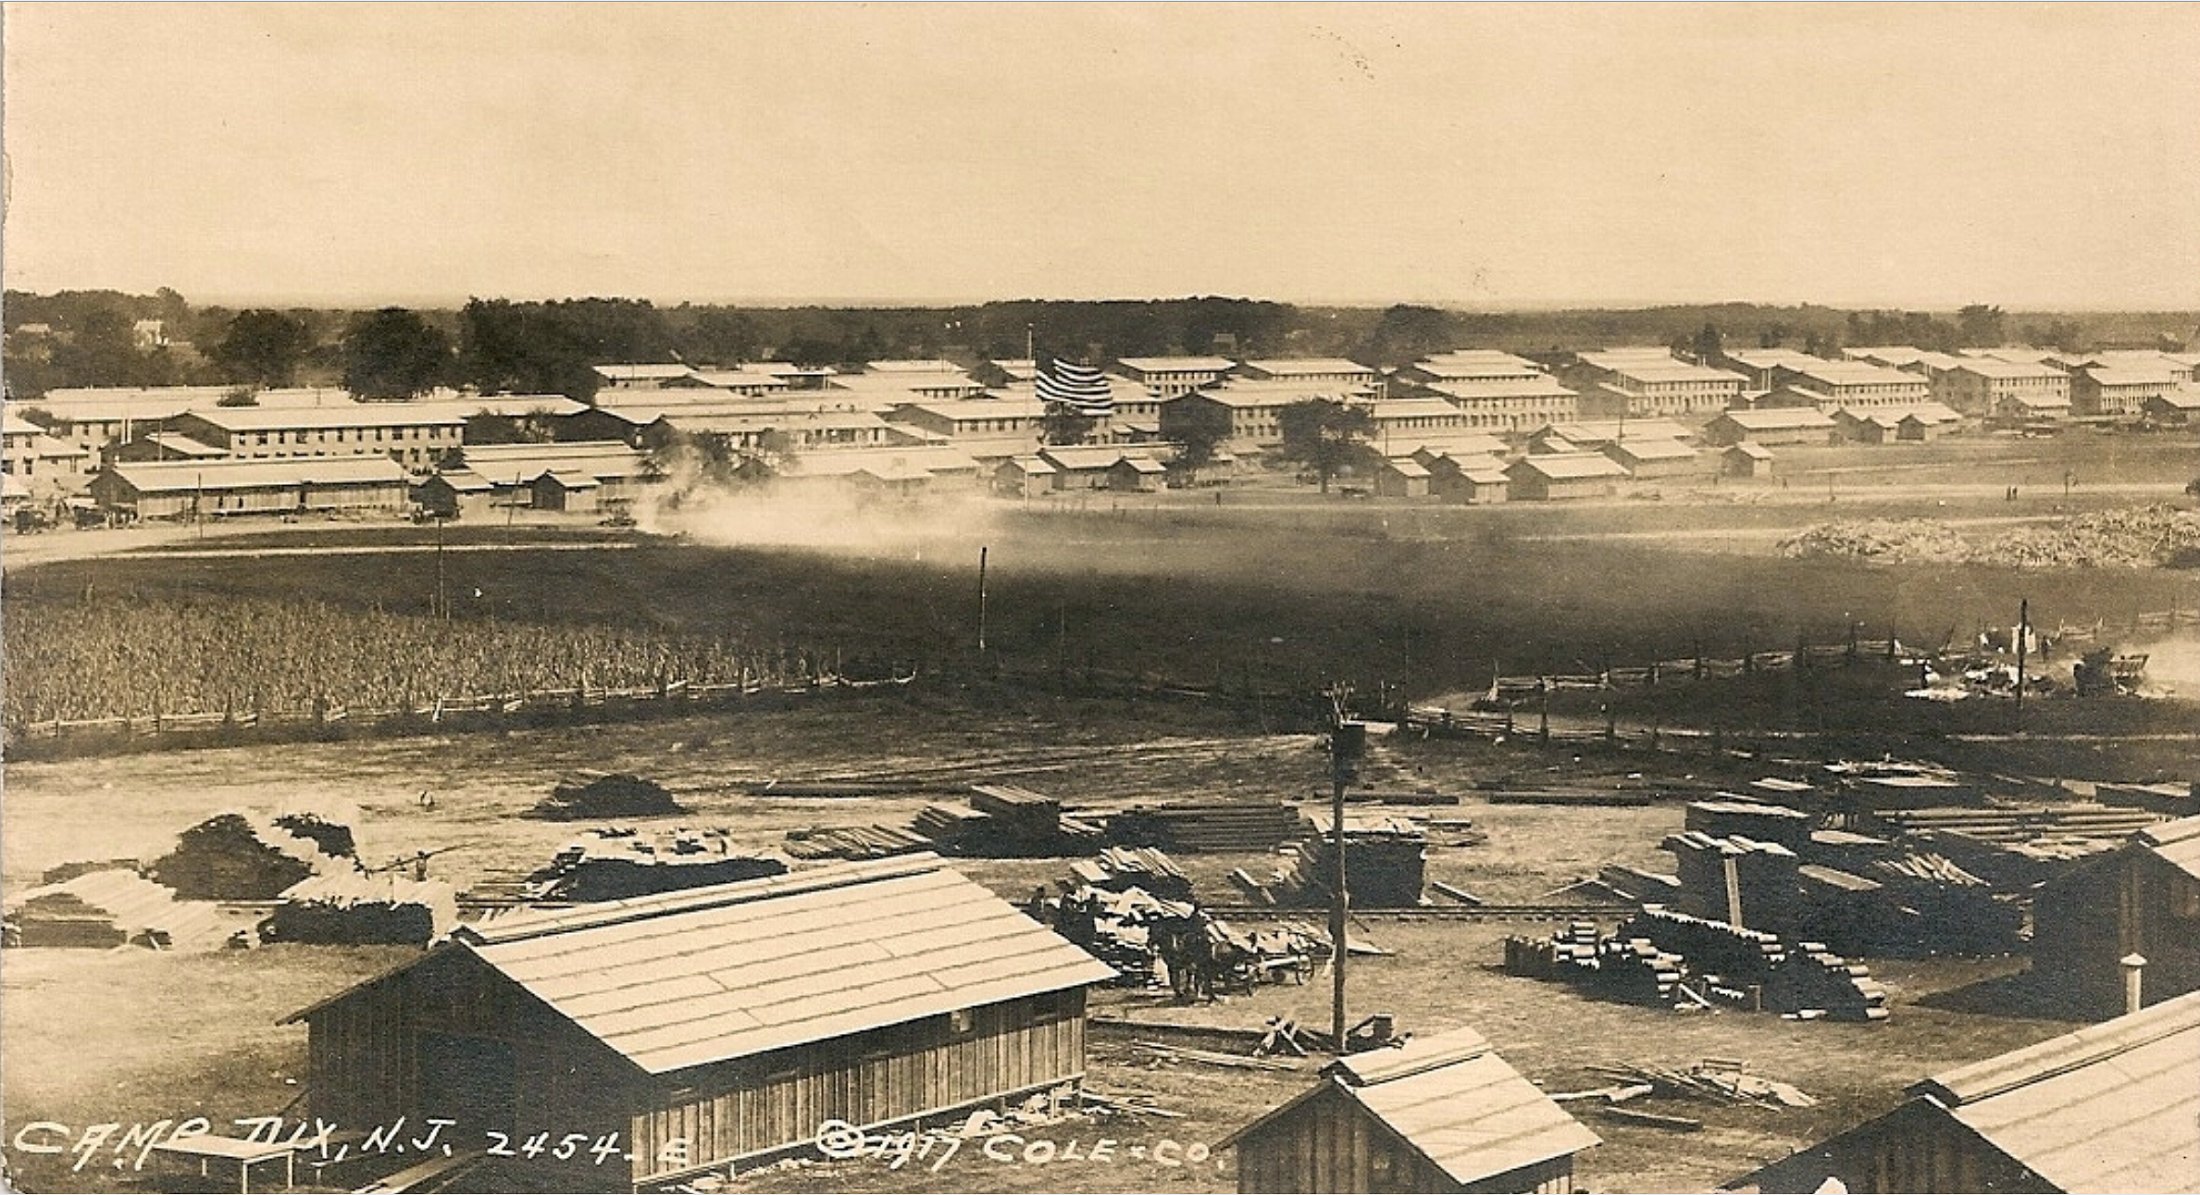 Camp Dix - Looking down at the Camp  -c 1917